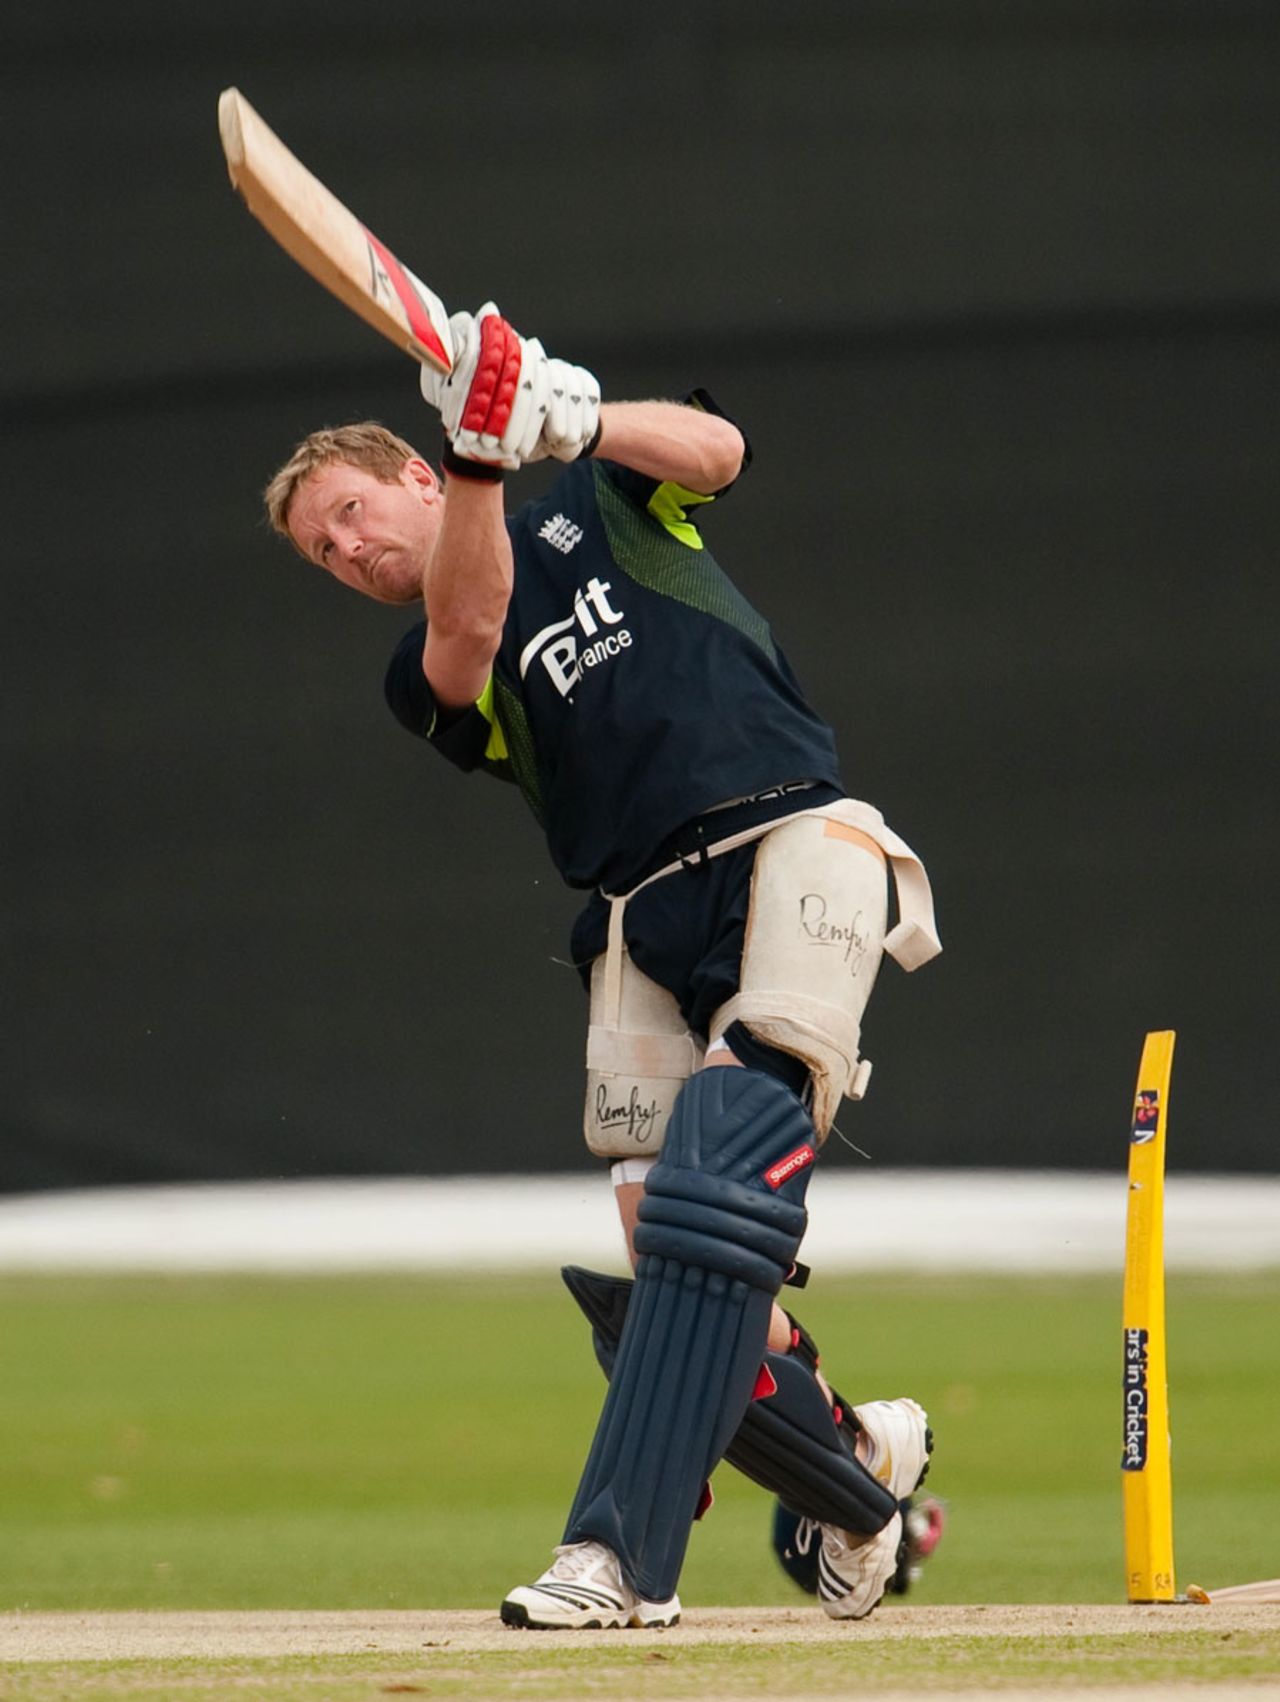 Paul Collingwood practices his range hitting ahead of England's first game as World Twenty20 champions, Cardiff, September 4, 2010